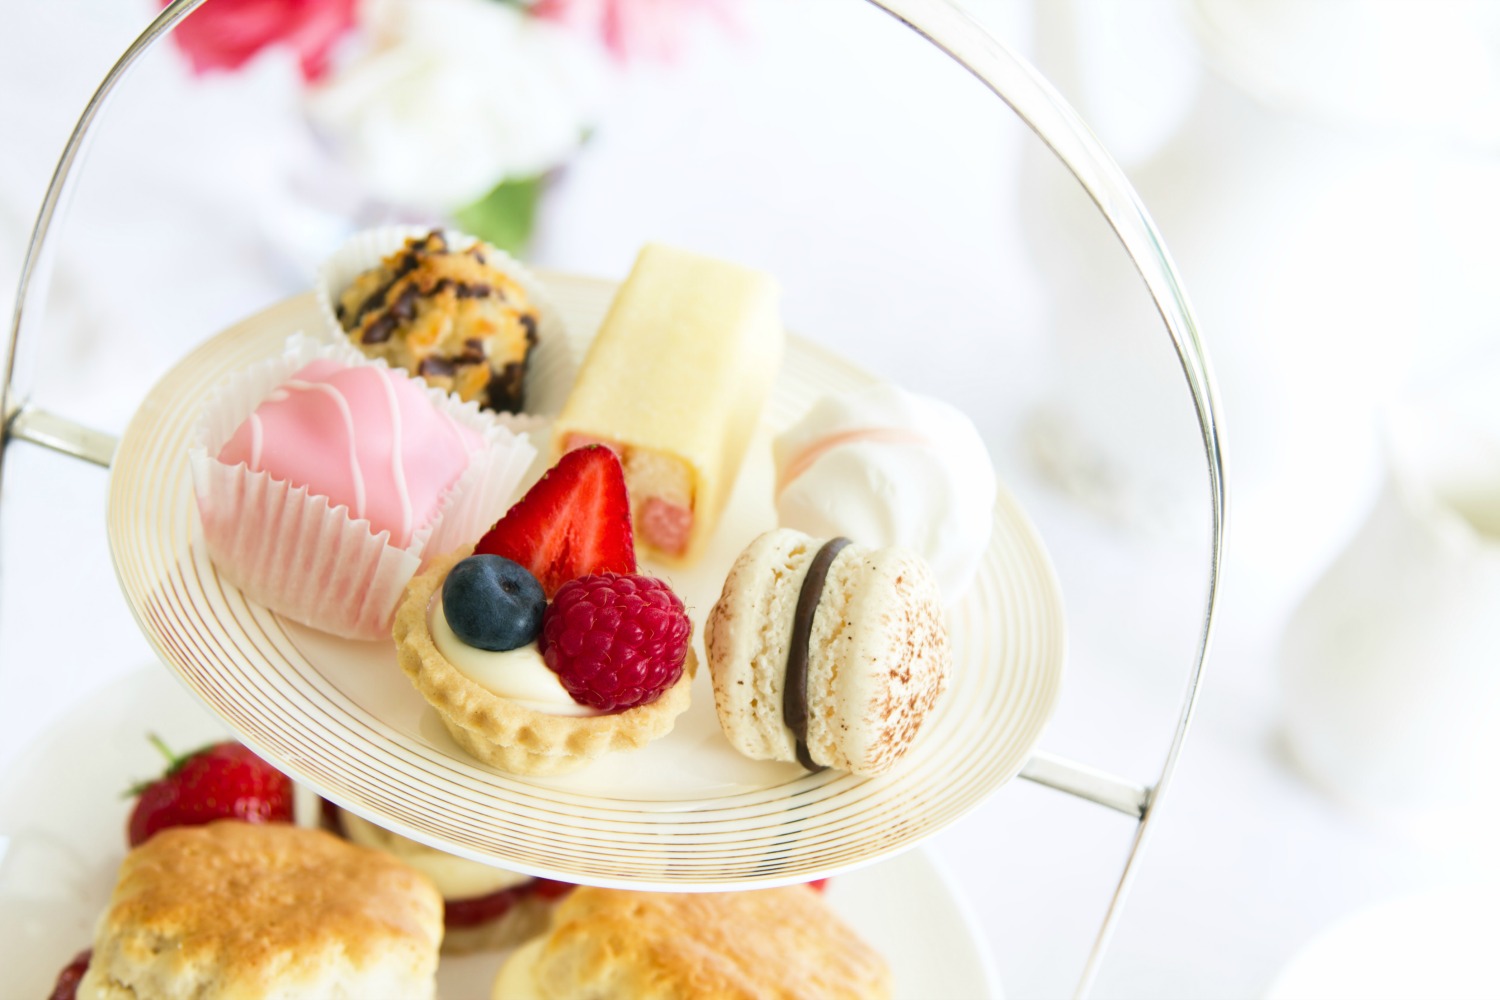 Stand of cakes and scones from a traditional afternoon tea - you can even have afternoon tea, including a Peppa Pig version, on board some of the best bus tours in London with kids